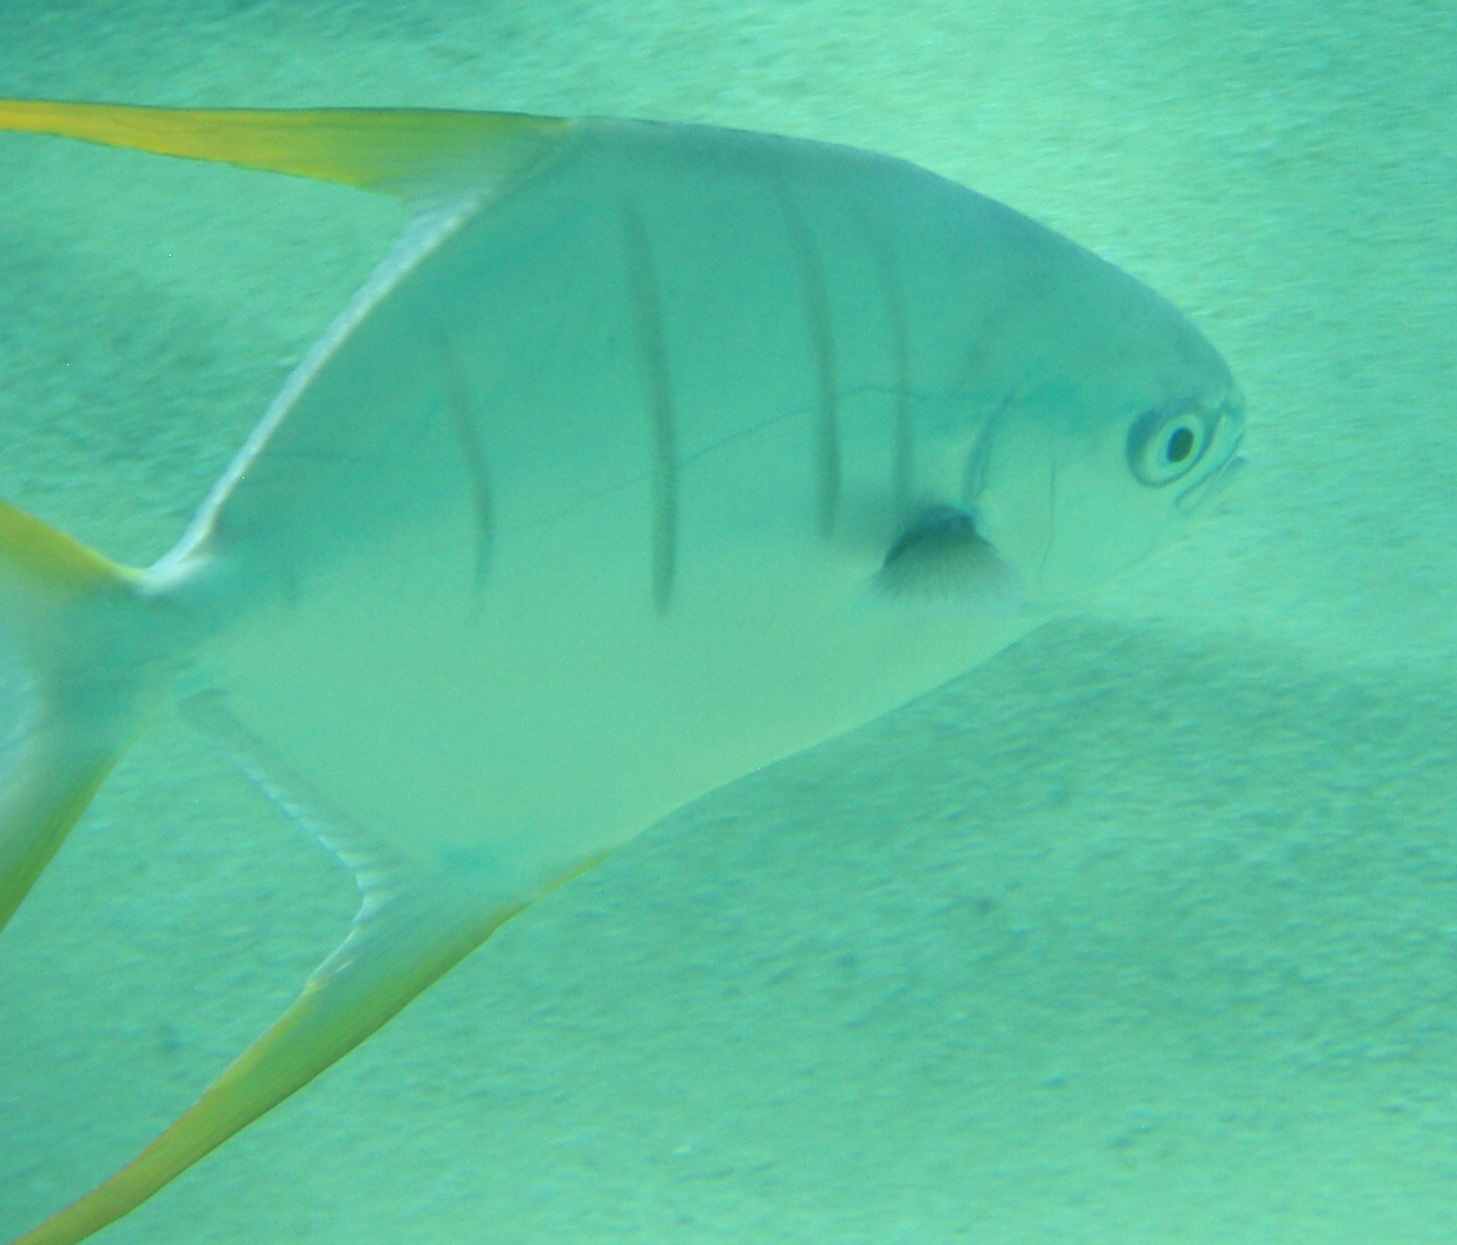 a fish with a short beak swimming in water